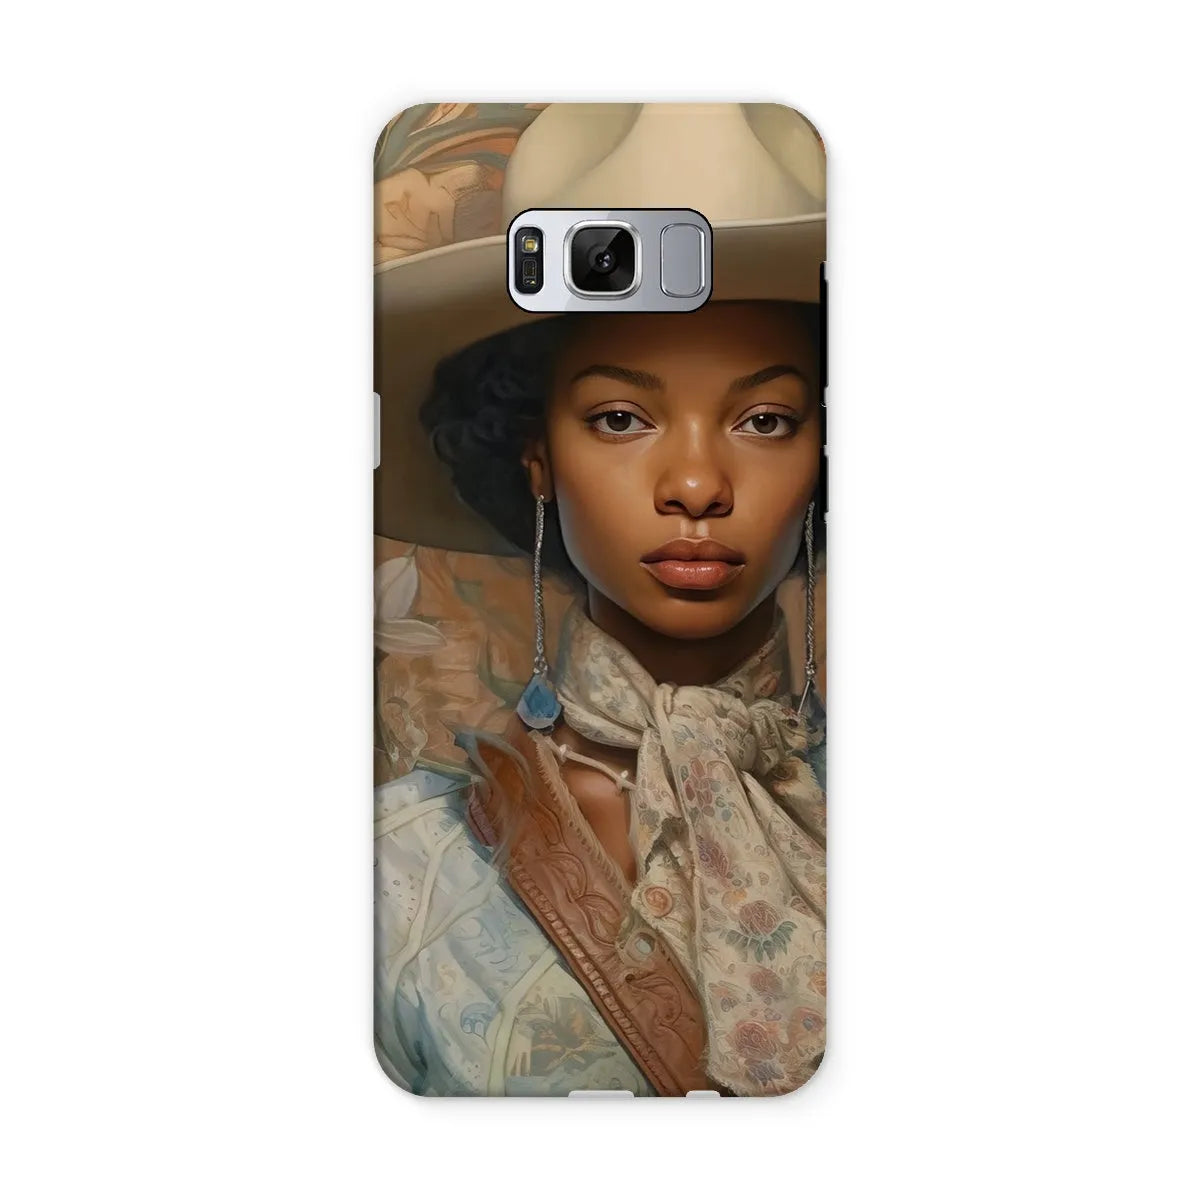 Imani The Lesbian Cowgirl - Sapphic Art Phone Case - Samsung Galaxy S8 / Matte - Mobile Phone Cases - Aesthetic Art